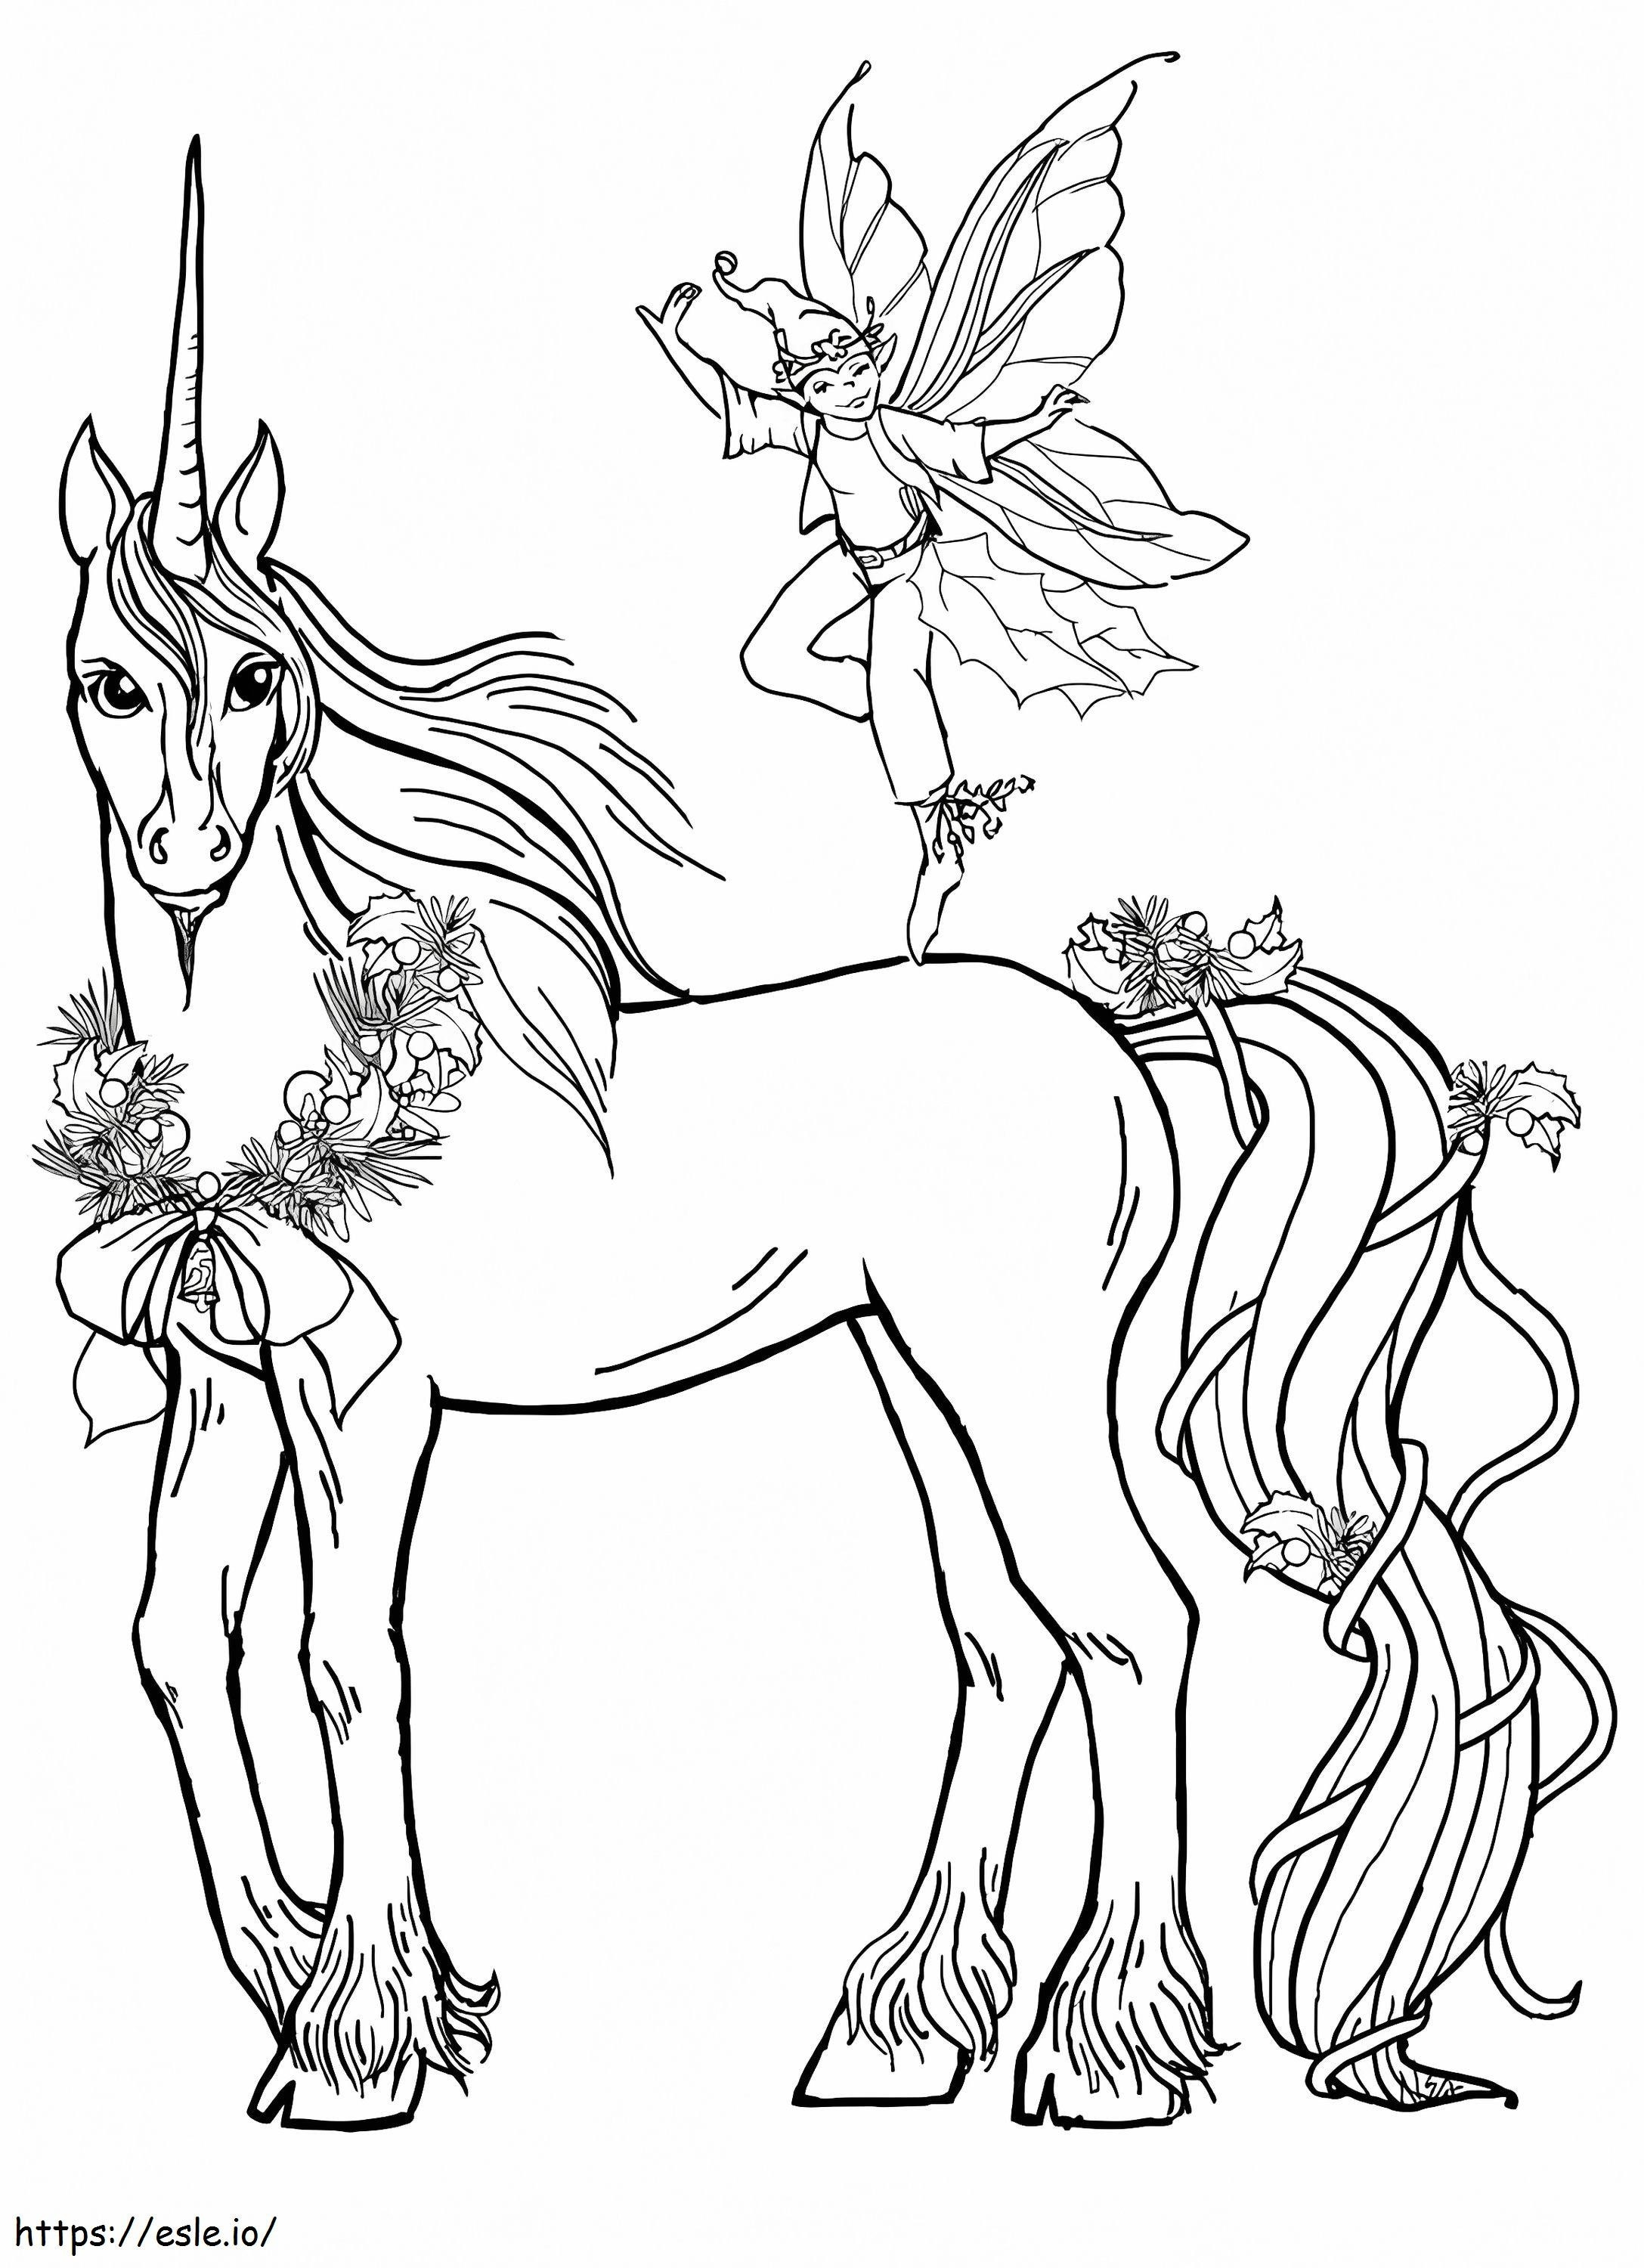 Fairy Flying With Unicorn coloring page